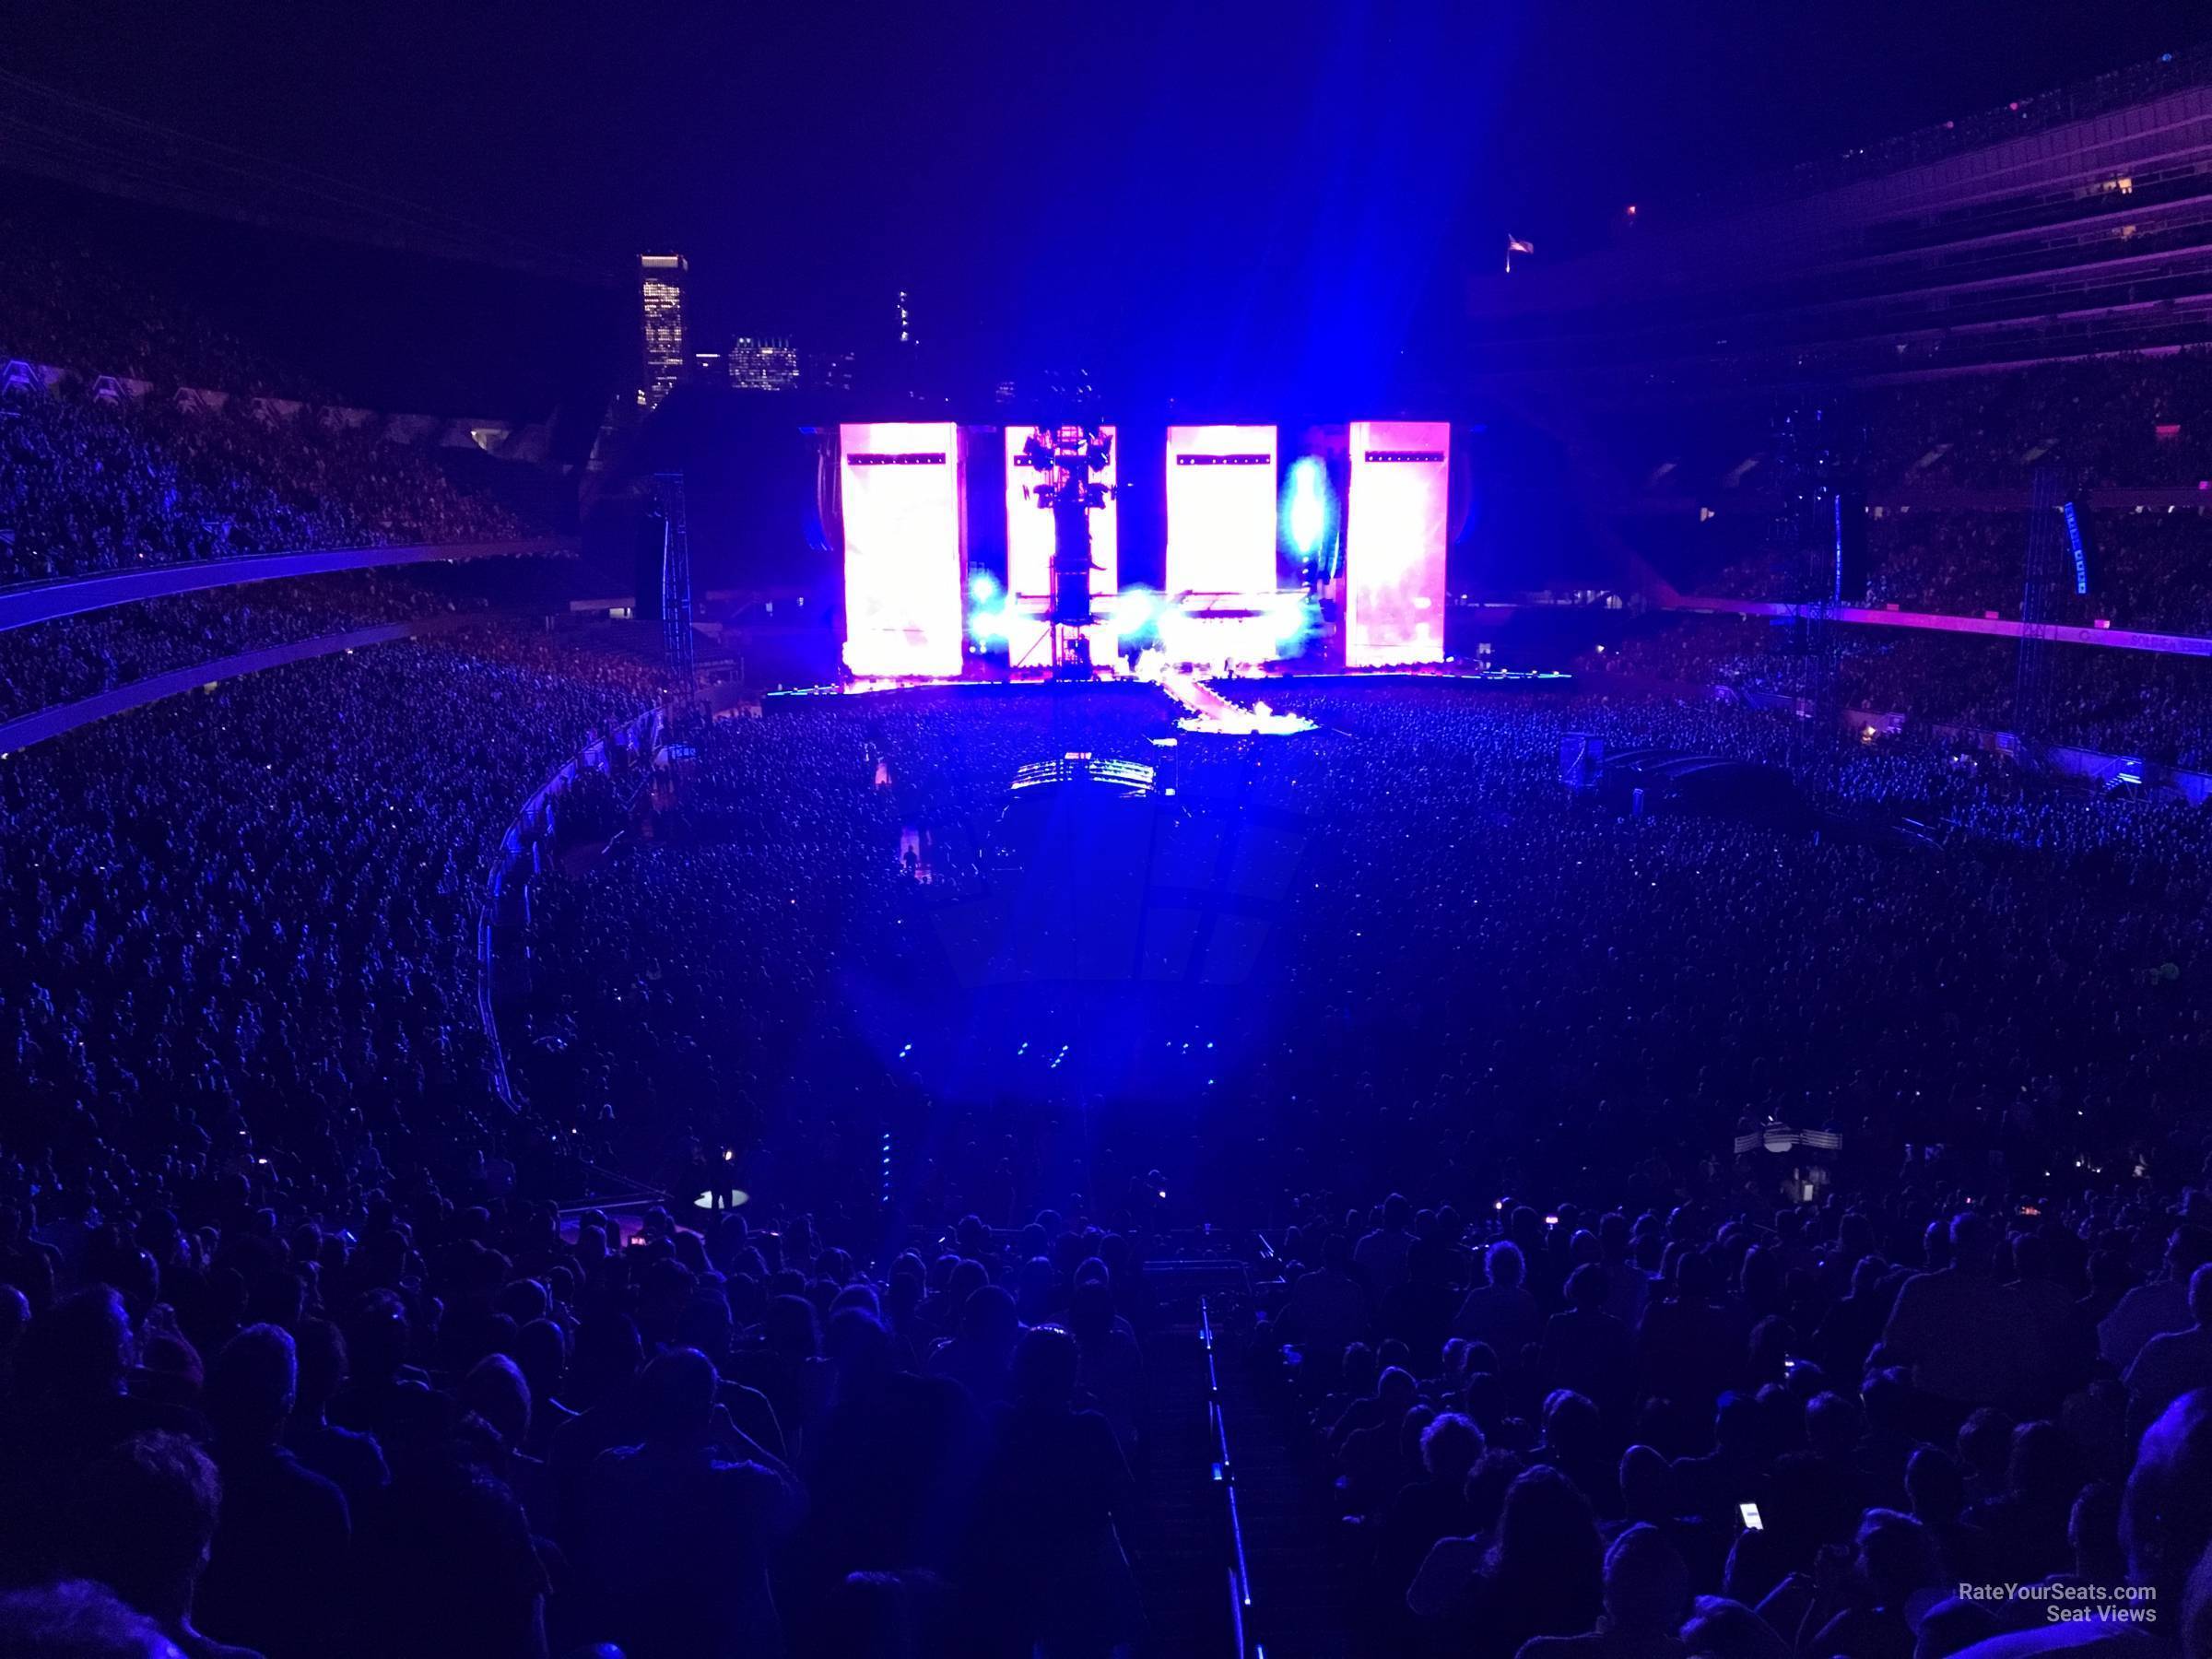 section 225, row 22 seat view  for concert - soldier field